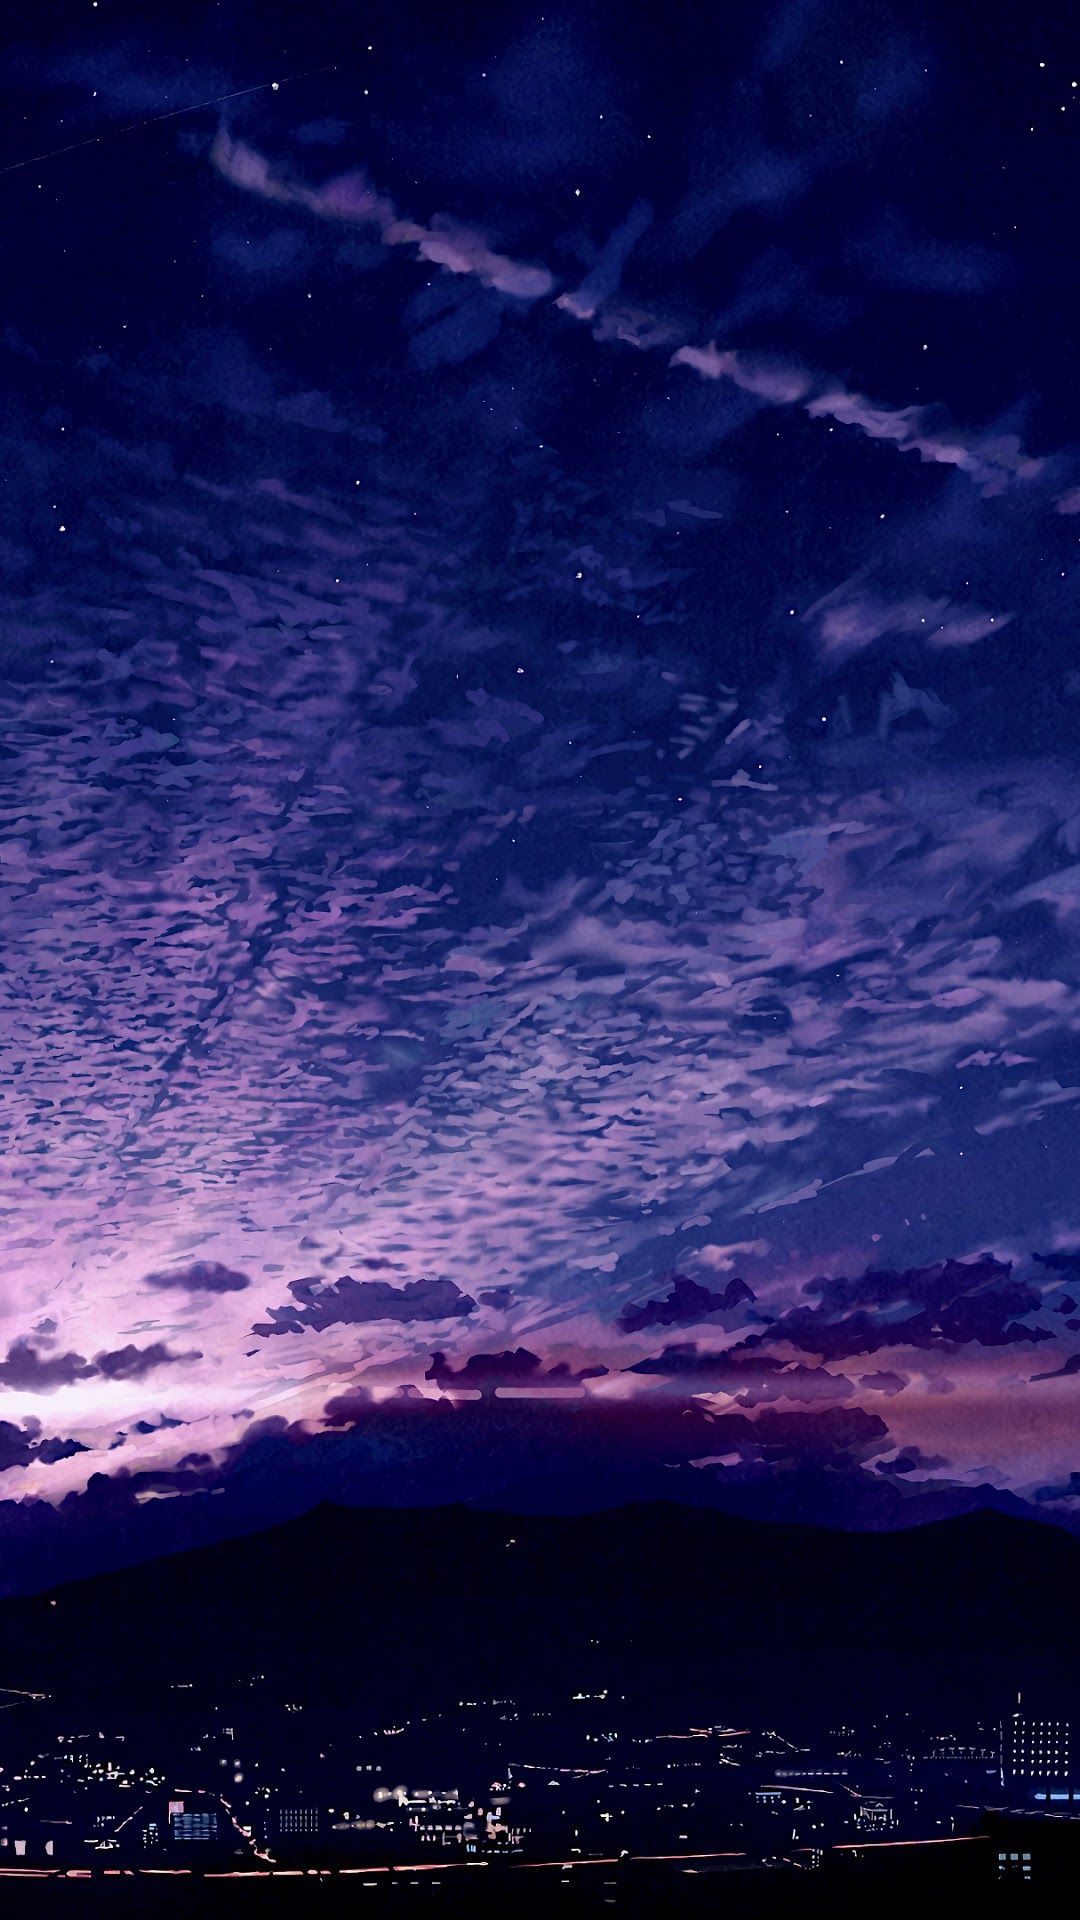 Anime Scenery Sunset Night Sky iPhone Wallpaper - Wallpapers Download 2023